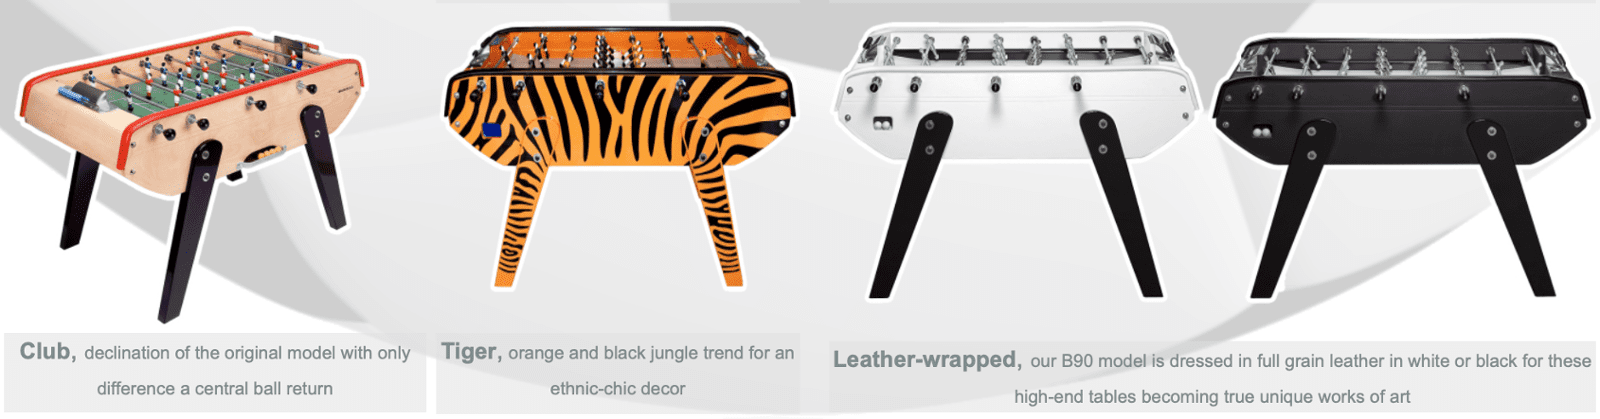 Club, Tiger, Leather-wrapped white or black